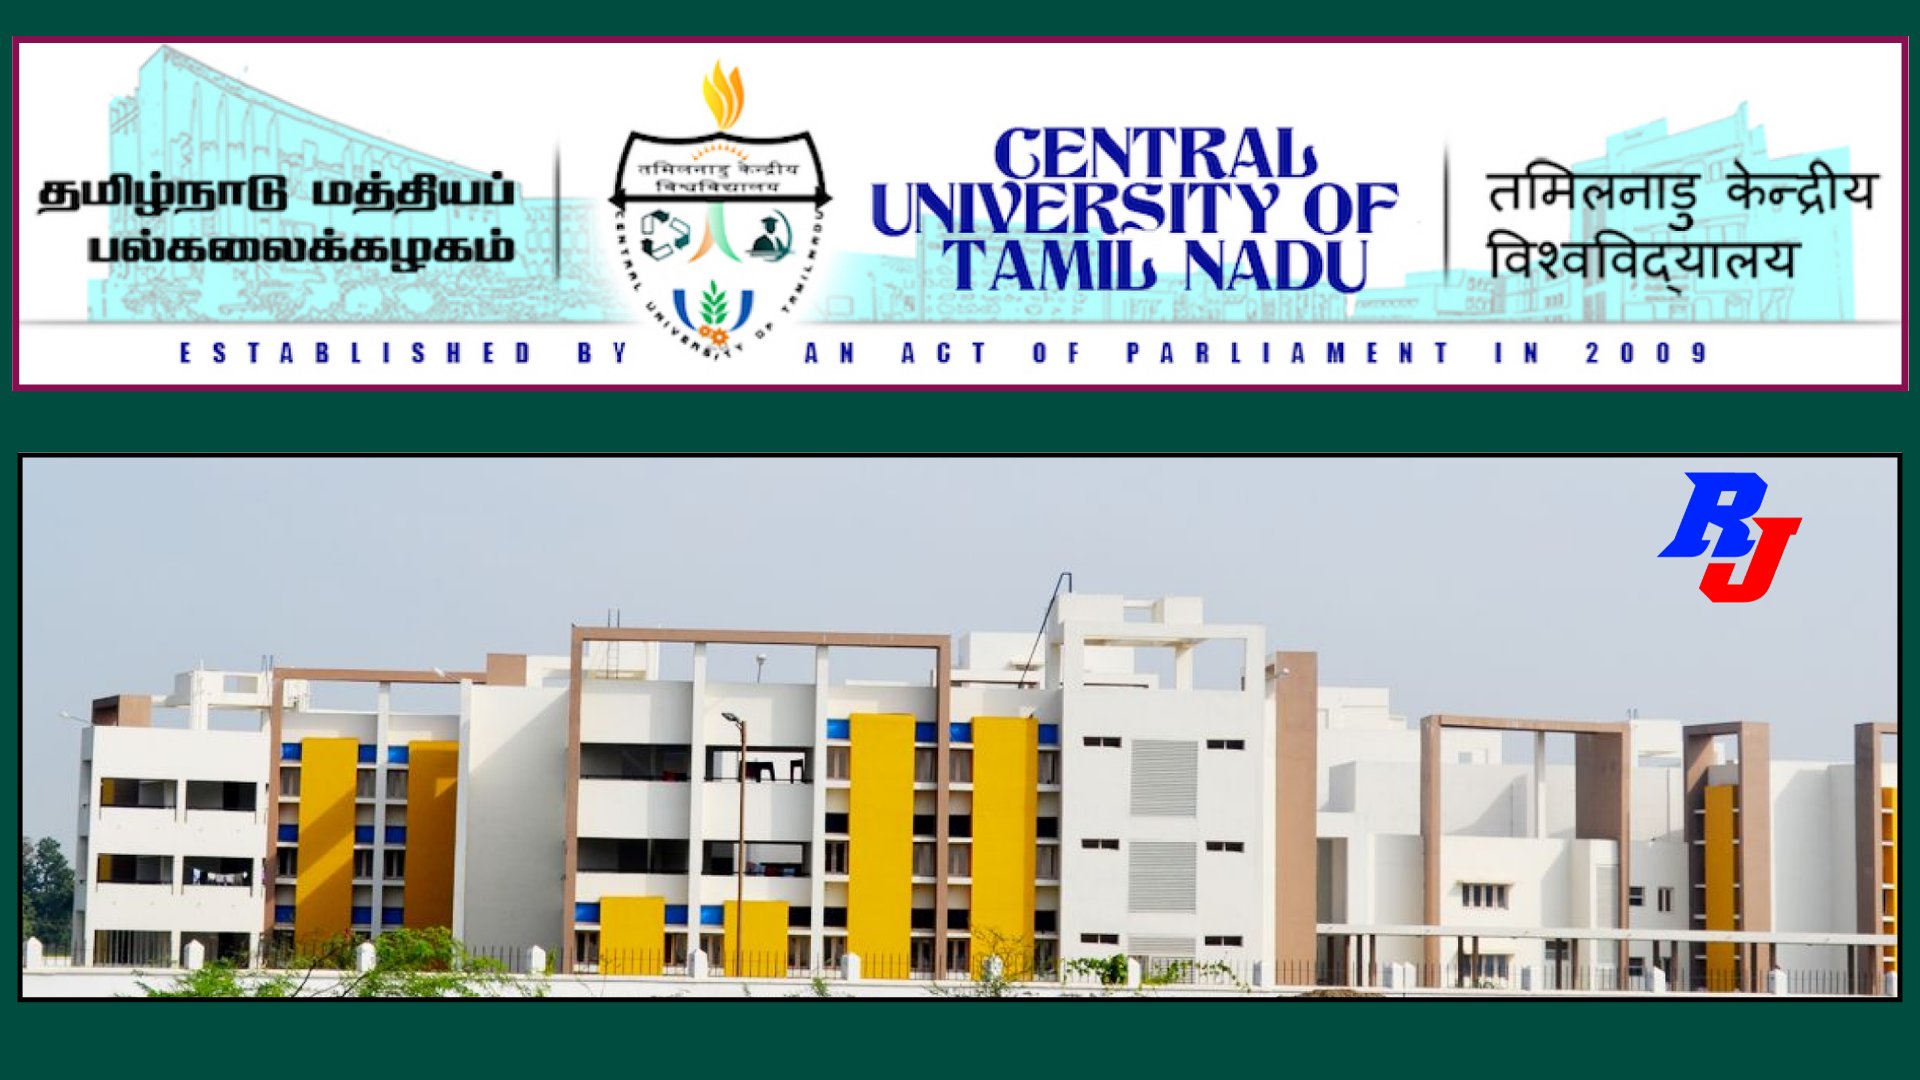 Faculty Recruitment in Central University of Tamil Nadu (CUTN), India